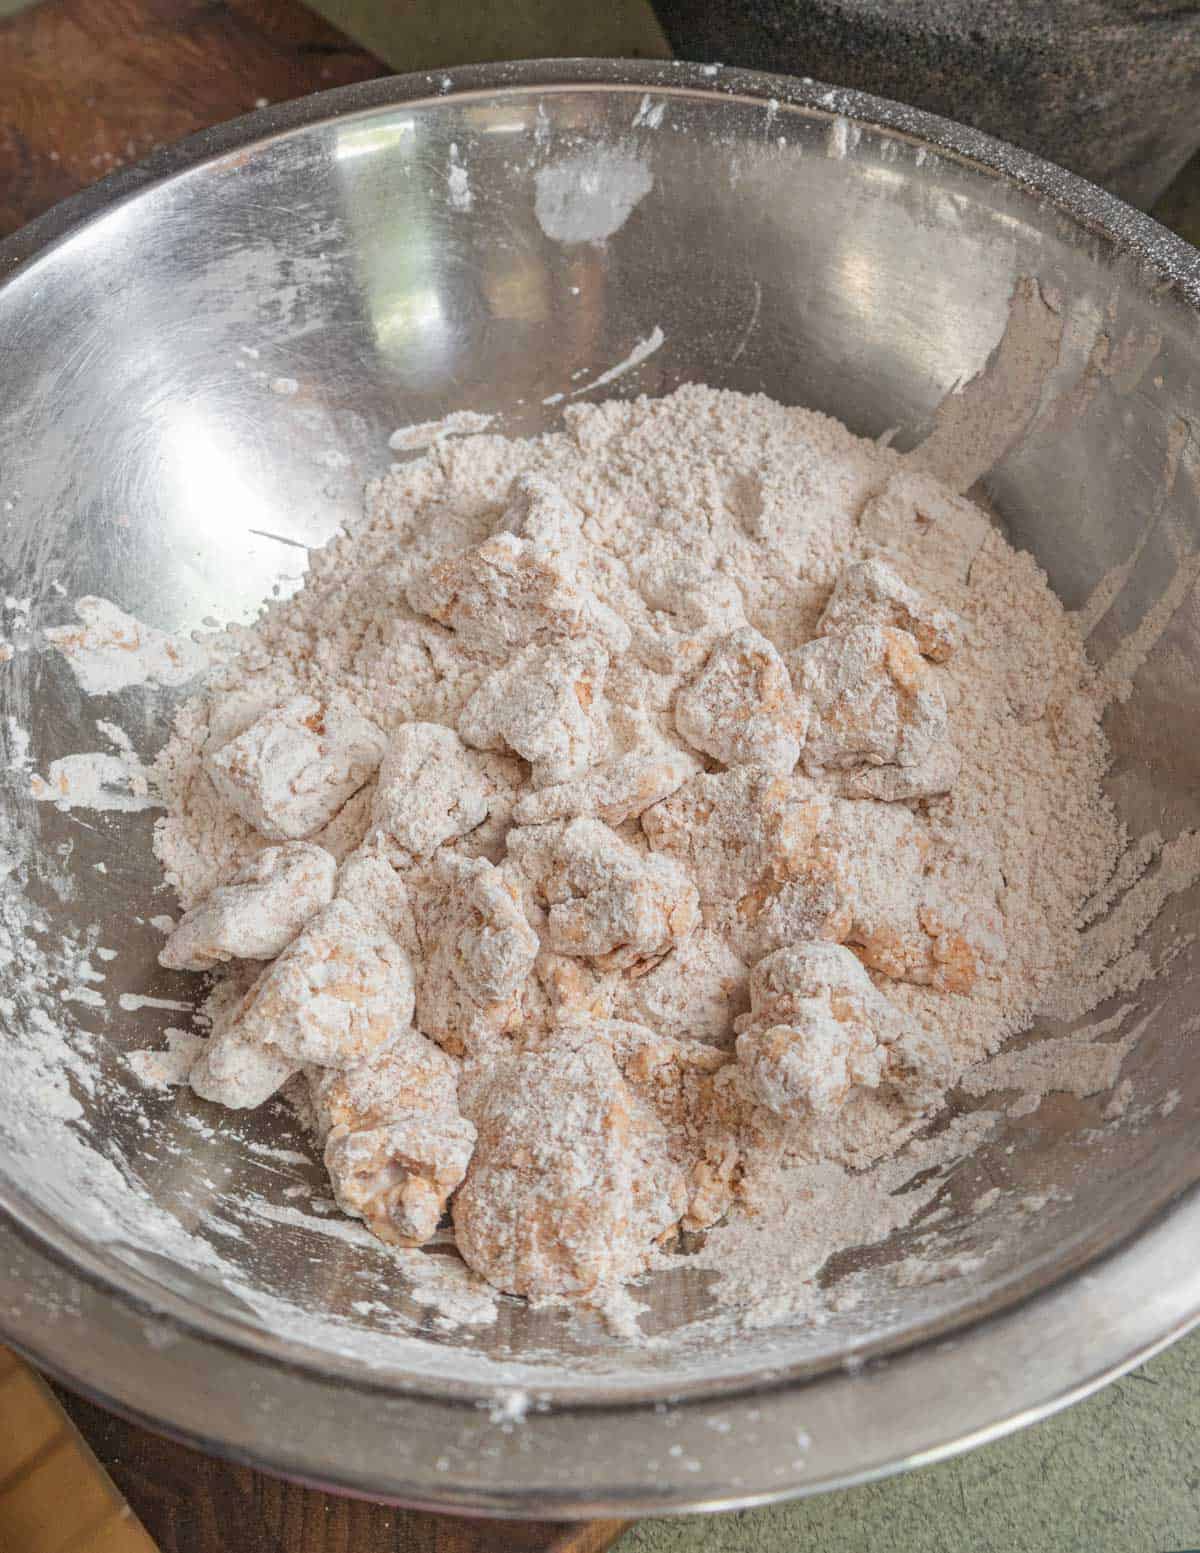 Mixing mushrooms in seasoned flour in a mixing bowl before frying.